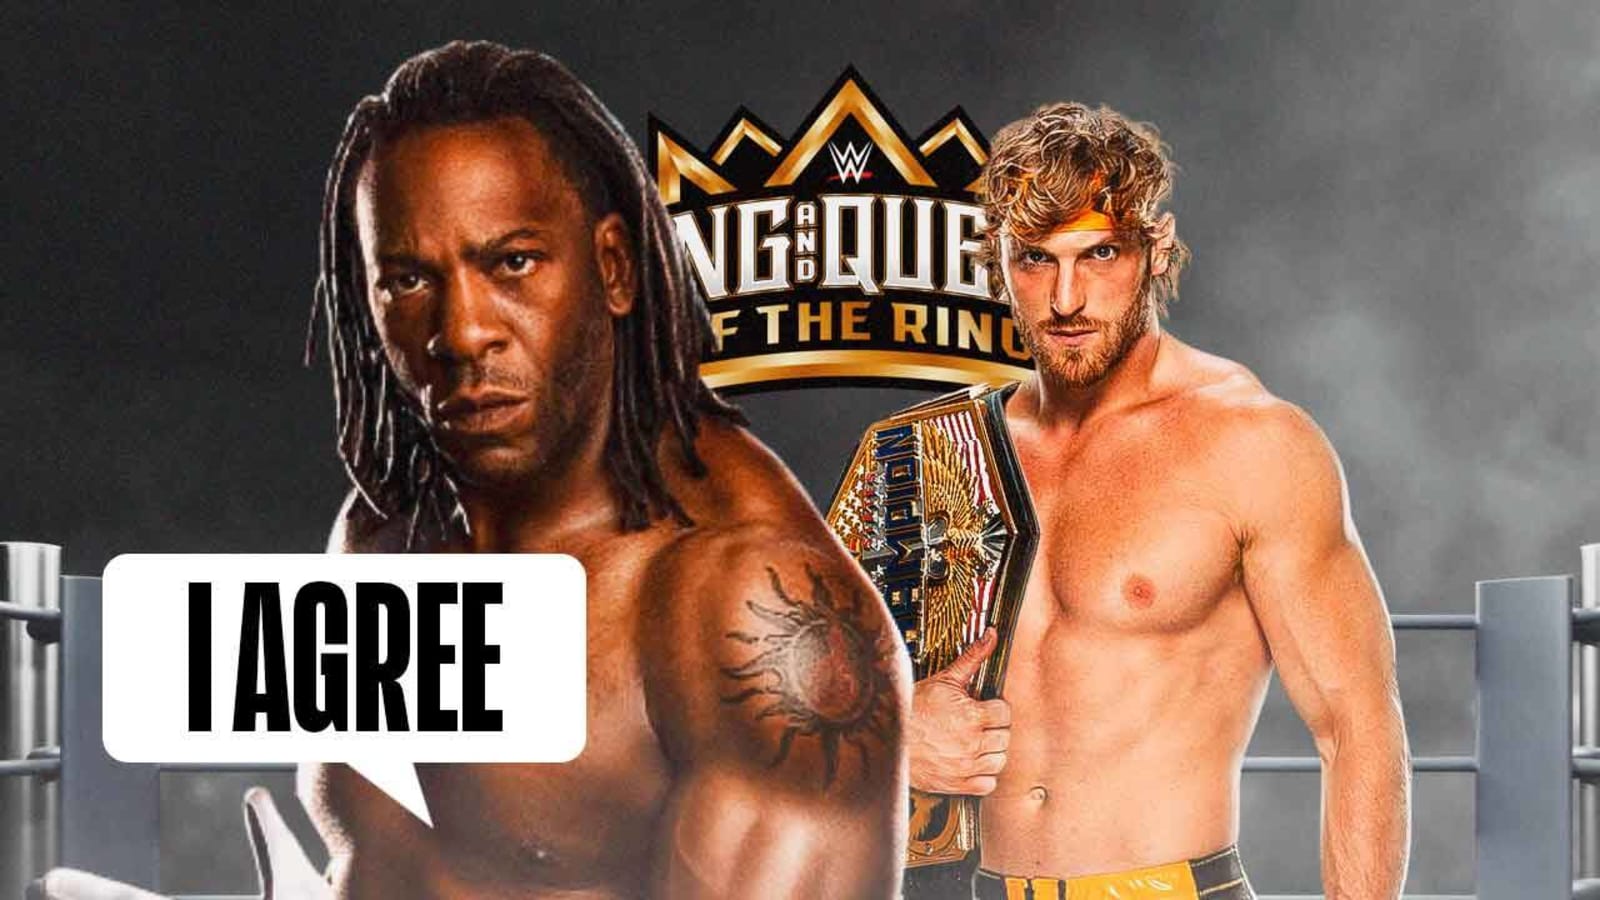 Booker T is actually on board with Logan Paul’s decision not to defend his title at King of the Ring